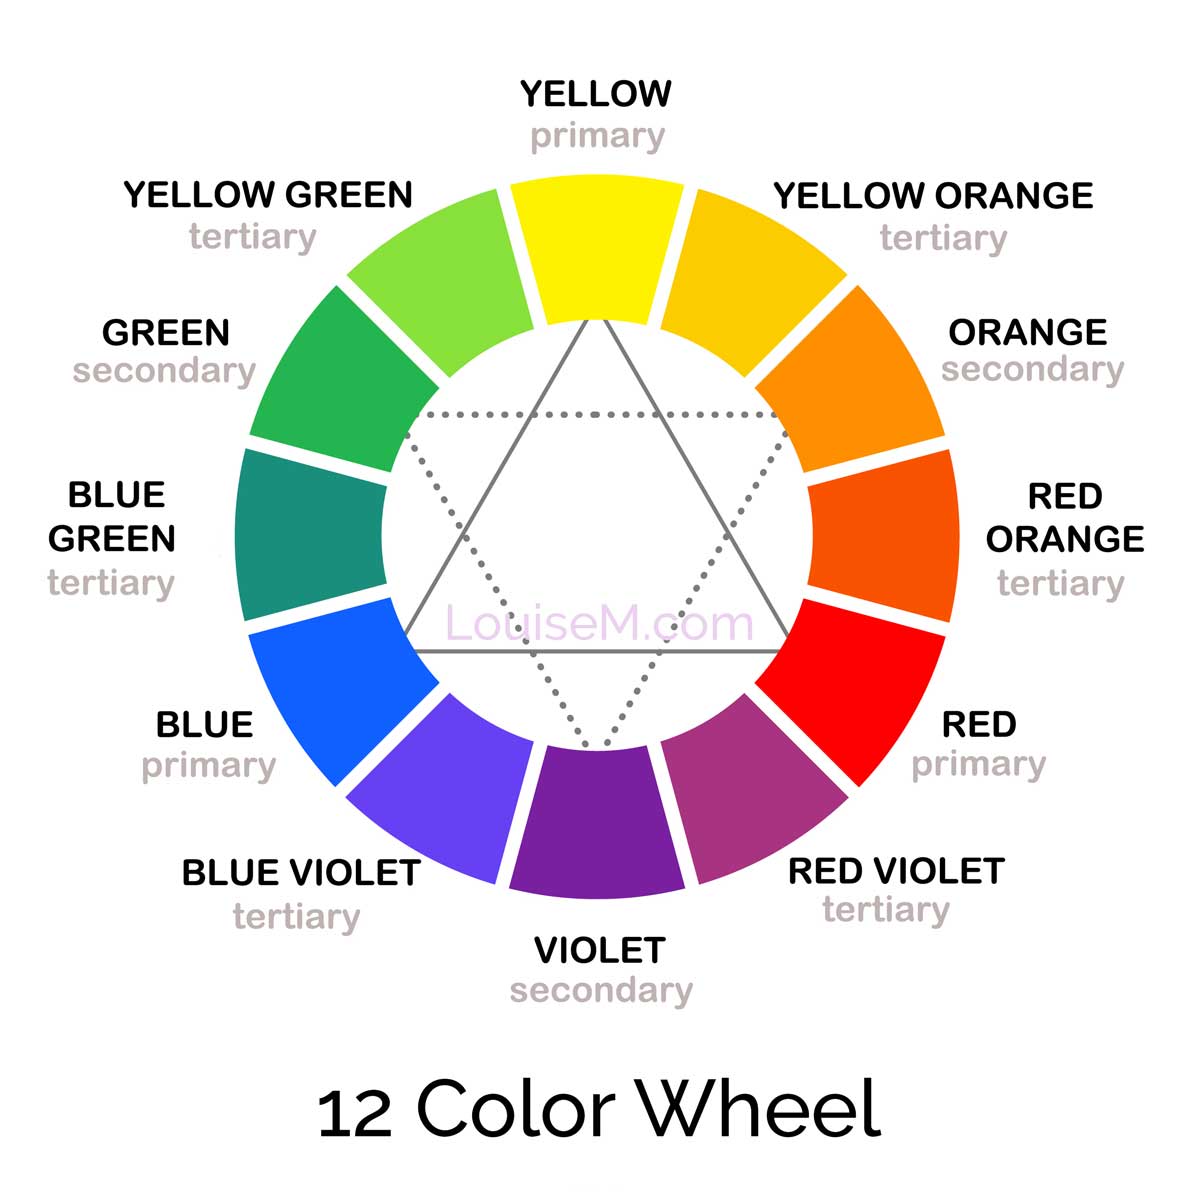 Illustration of The basic 12 color wheel showing all the primary, secondary, and tertiary colors.